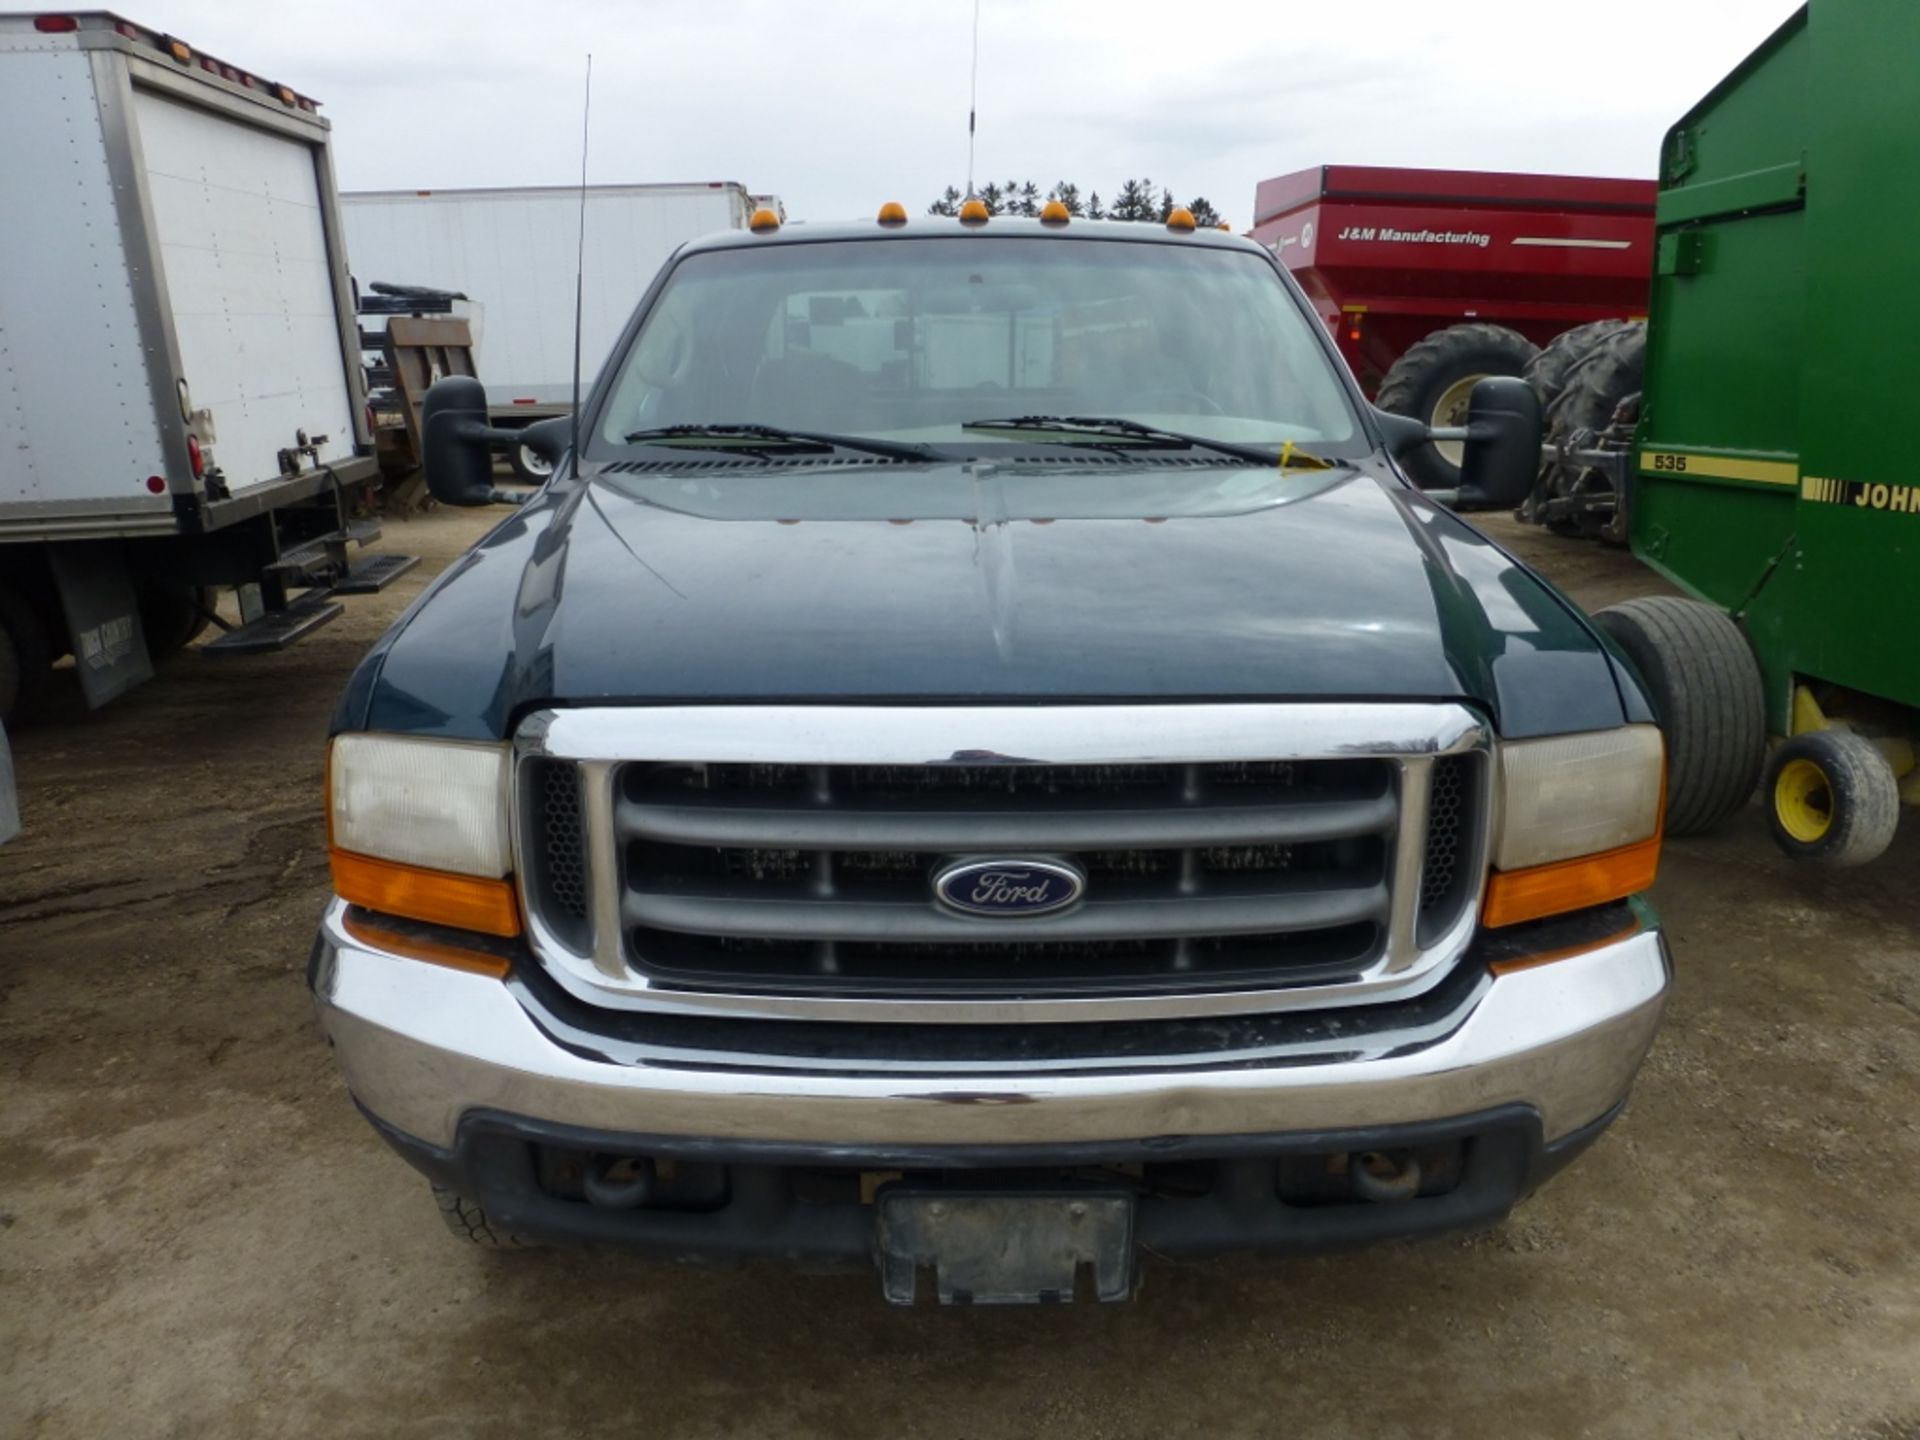 1999 Ford F350 Lariat Crew Cab, 4x4, 7.3 Diesel engine, 208,897 unverified miles, w/ utility bed. - Image 6 of 22